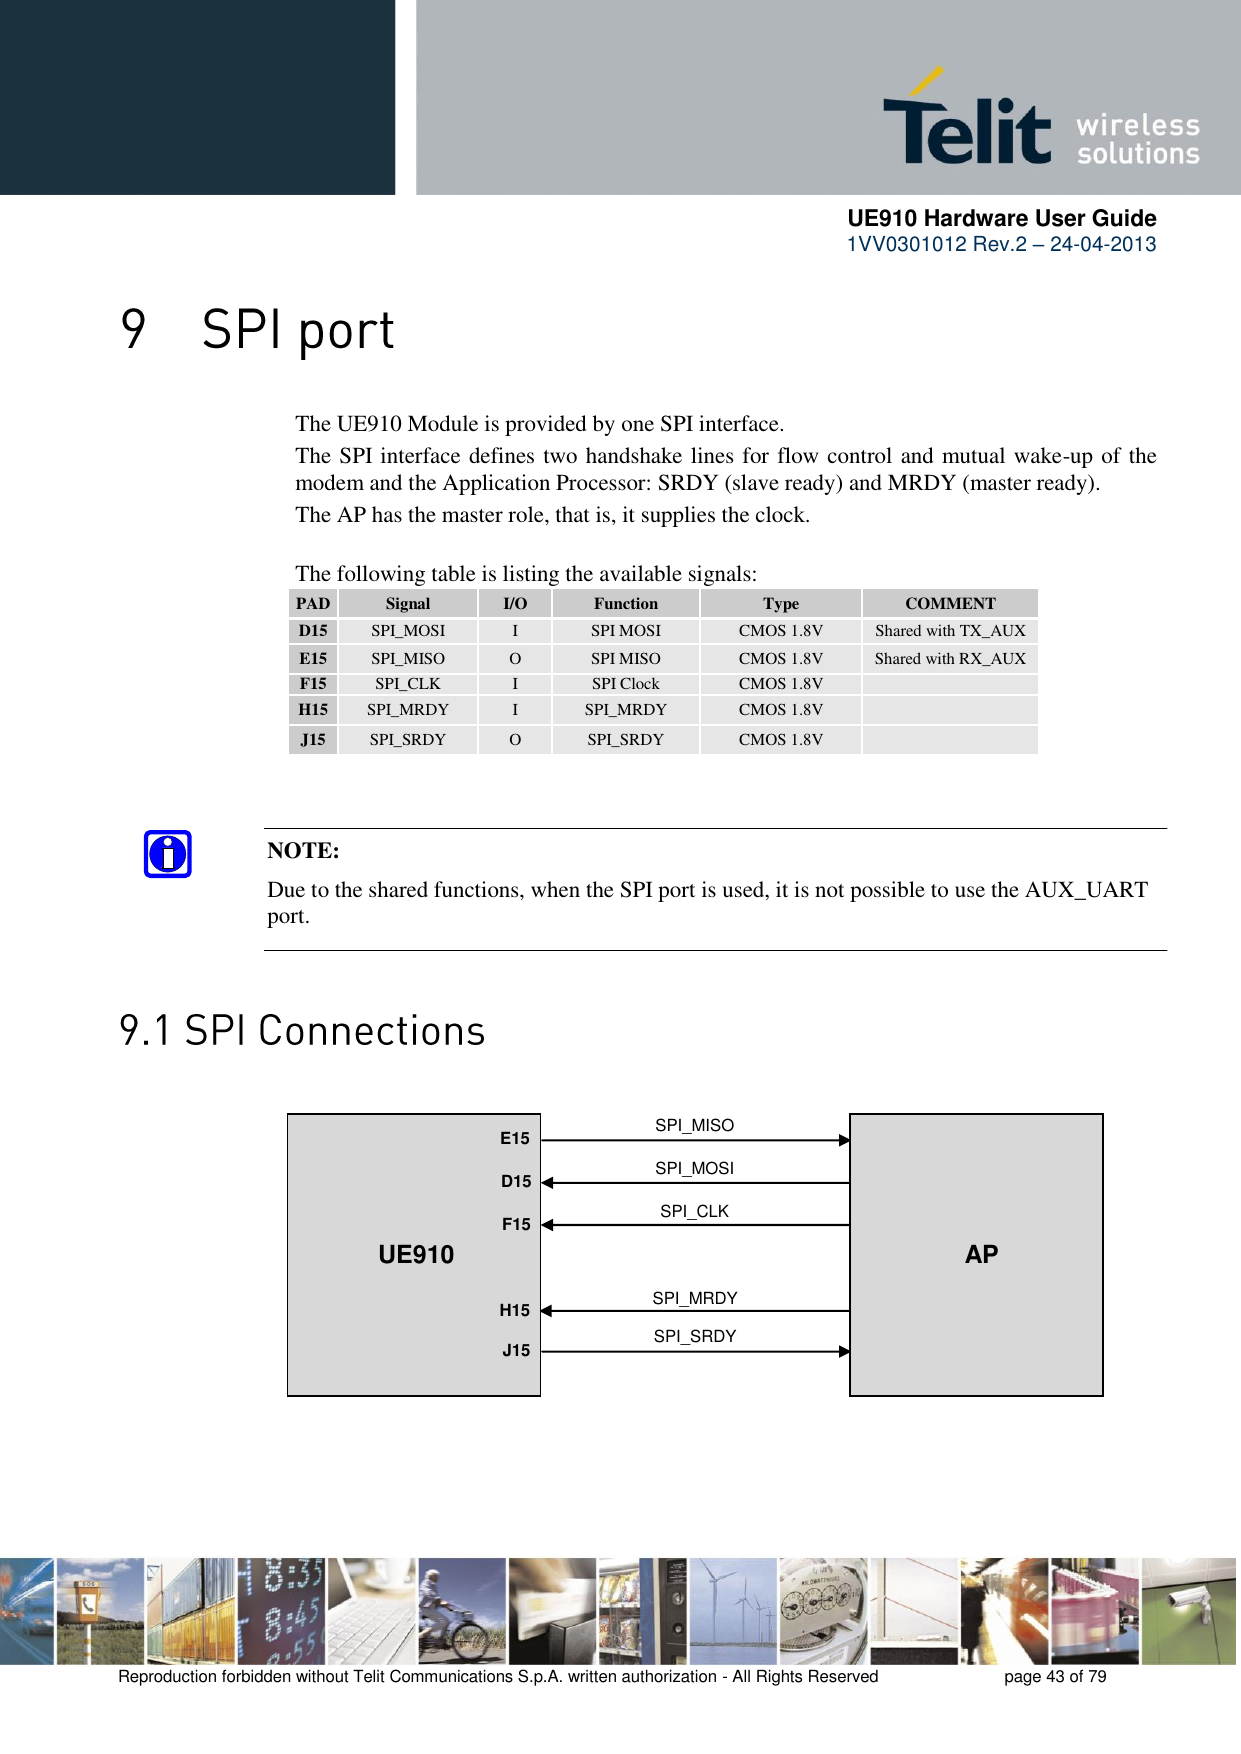      UE910 Hardware User Guide  1VV0301012 Rev.2 – 24-04-2013    Reproduction forbidden without Telit Communications S.p.A. written authorization - All Rights Reserved    page 43 of 79   The UE910 Module is provided by one SPI interface.       The SPI interface defines two handshake lines for flow control and mutual wake-up of the     modem and the Application Processor: SRDY (slave ready) and MRDY (master ready).     The AP has the master role, that is, it supplies the clock.      The following table is listing the available signals: PAD Signal I/O Function Type COMMENT D15 SPI_MOSI I SPI MOSI CMOS 1.8V Shared with TX_AUX E15 SPI_MISO O SPI MISO CMOS 1.8V Shared with RX_AUX F15 SPI_CLK I SPI Clock CMOS 1.8V  H15 SPI_MRDY I SPI_MRDY CMOS 1.8V  J15 SPI_SRDY O SPI_SRDY CMOS 1.8V      NOTE:  Due to the shared functions, when the SPI port is used, it is not possible to use the AUX_UART port. SPI_MISO SPI_MOSI SPI_CLK SPI_MRDY SPI_SRDY E15 D15 F15  H15 J15  UE910 AP 